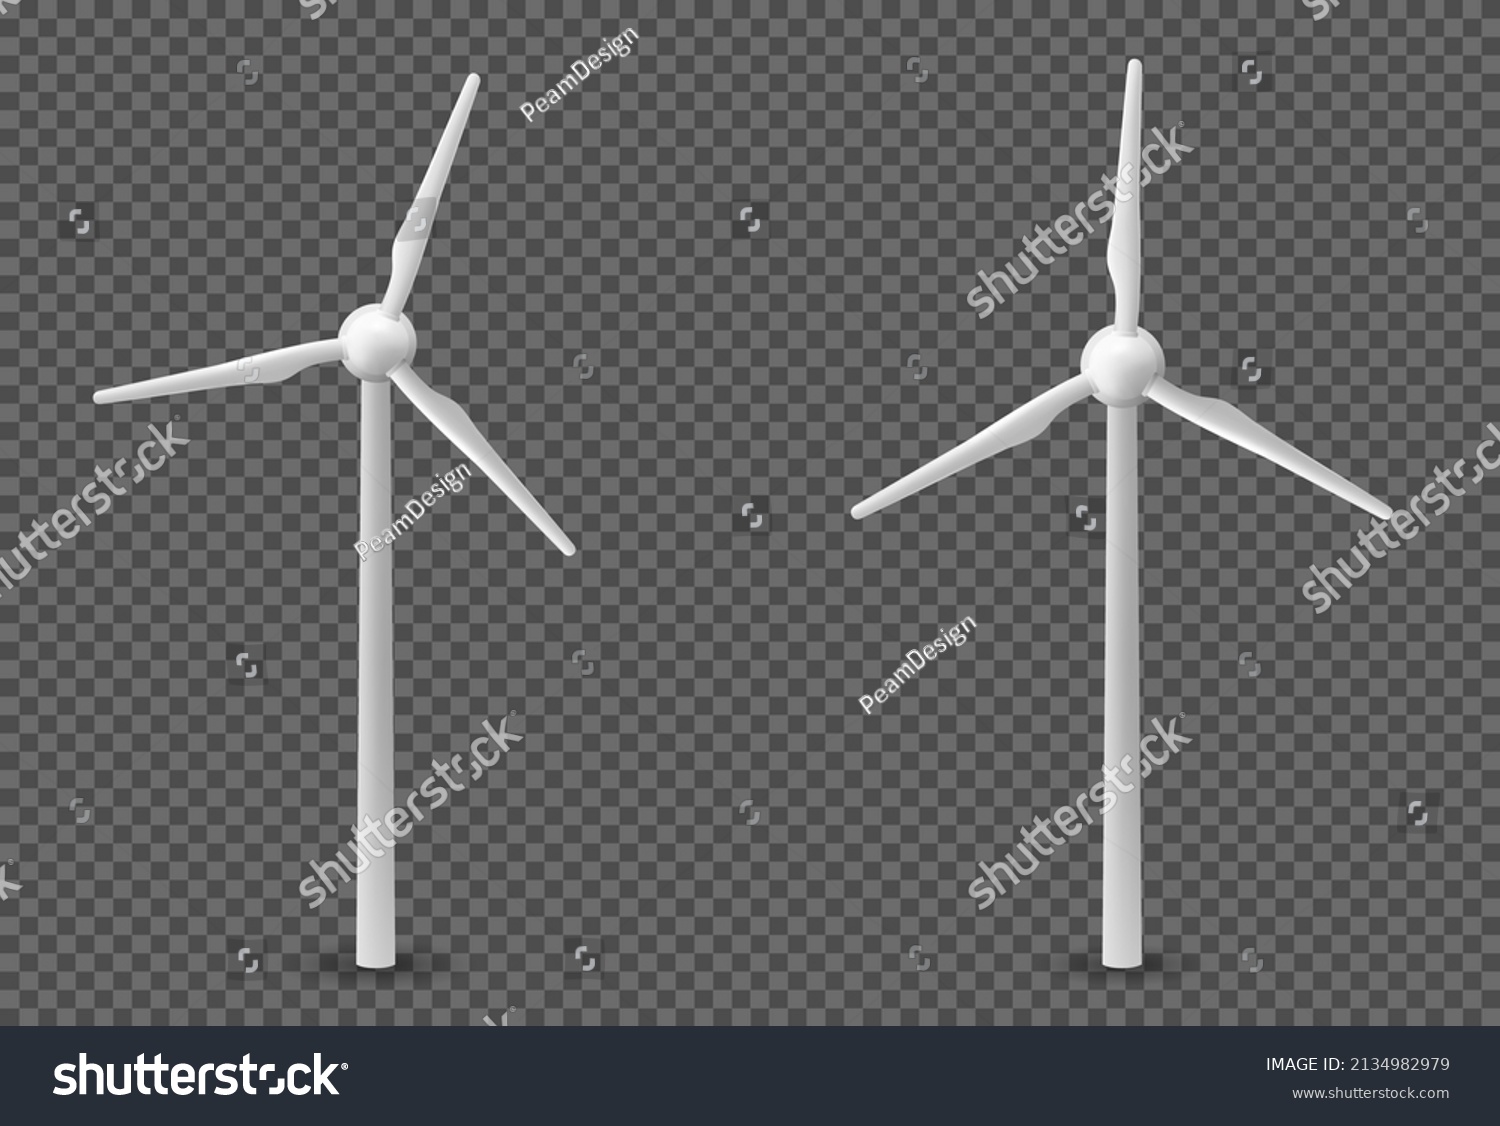 Wind turbine 3d effect isolated on transparent background in vector format #2134982979